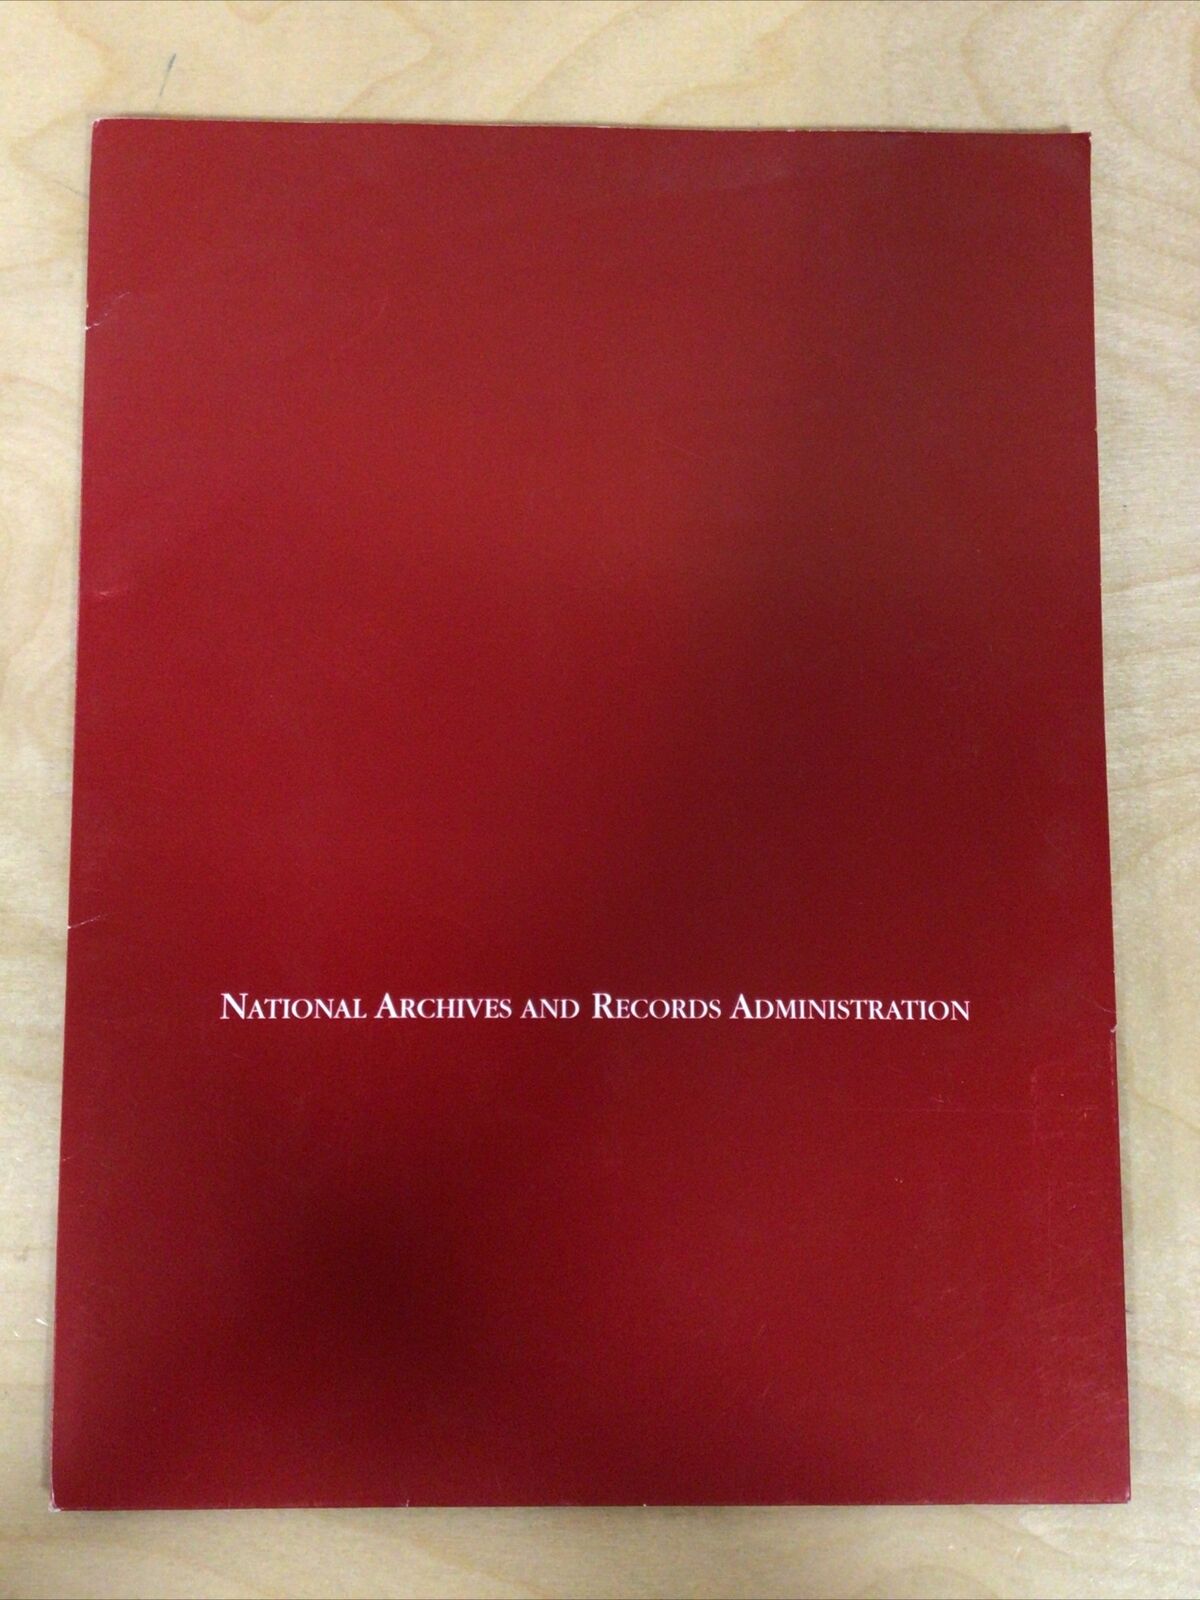 National Archives & Records Administration Program (2003) Tom D. Crouch